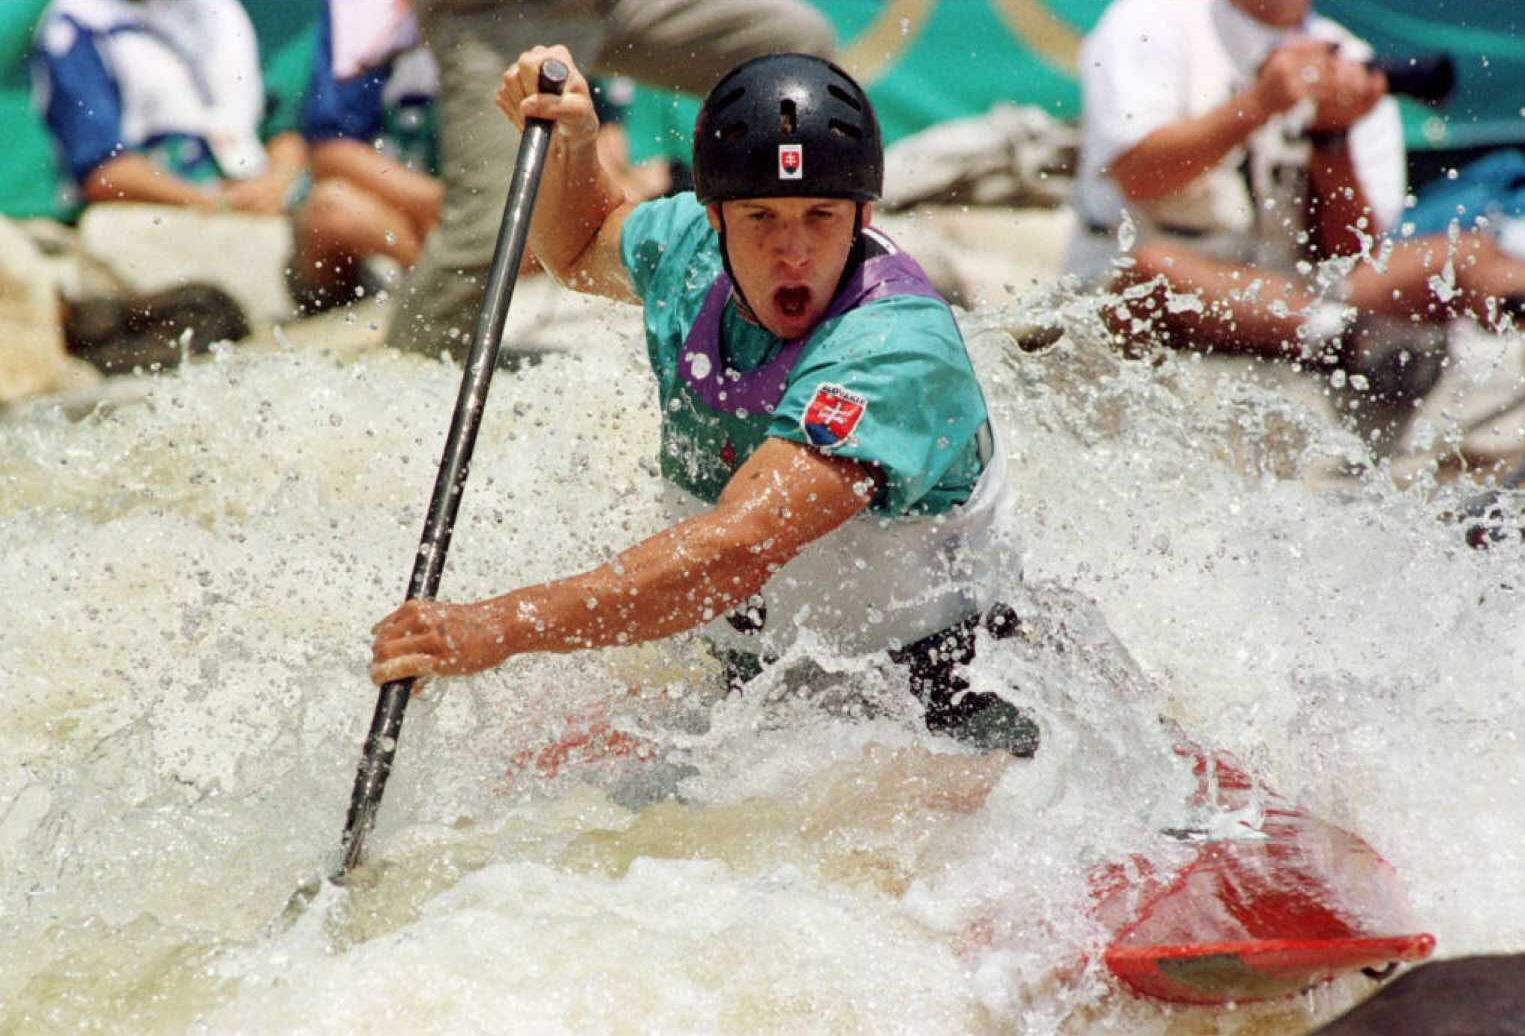 The Ocoee Whitewater Center hosted competition during the Atlanta 1996 Summer Olympics ©Getty Images